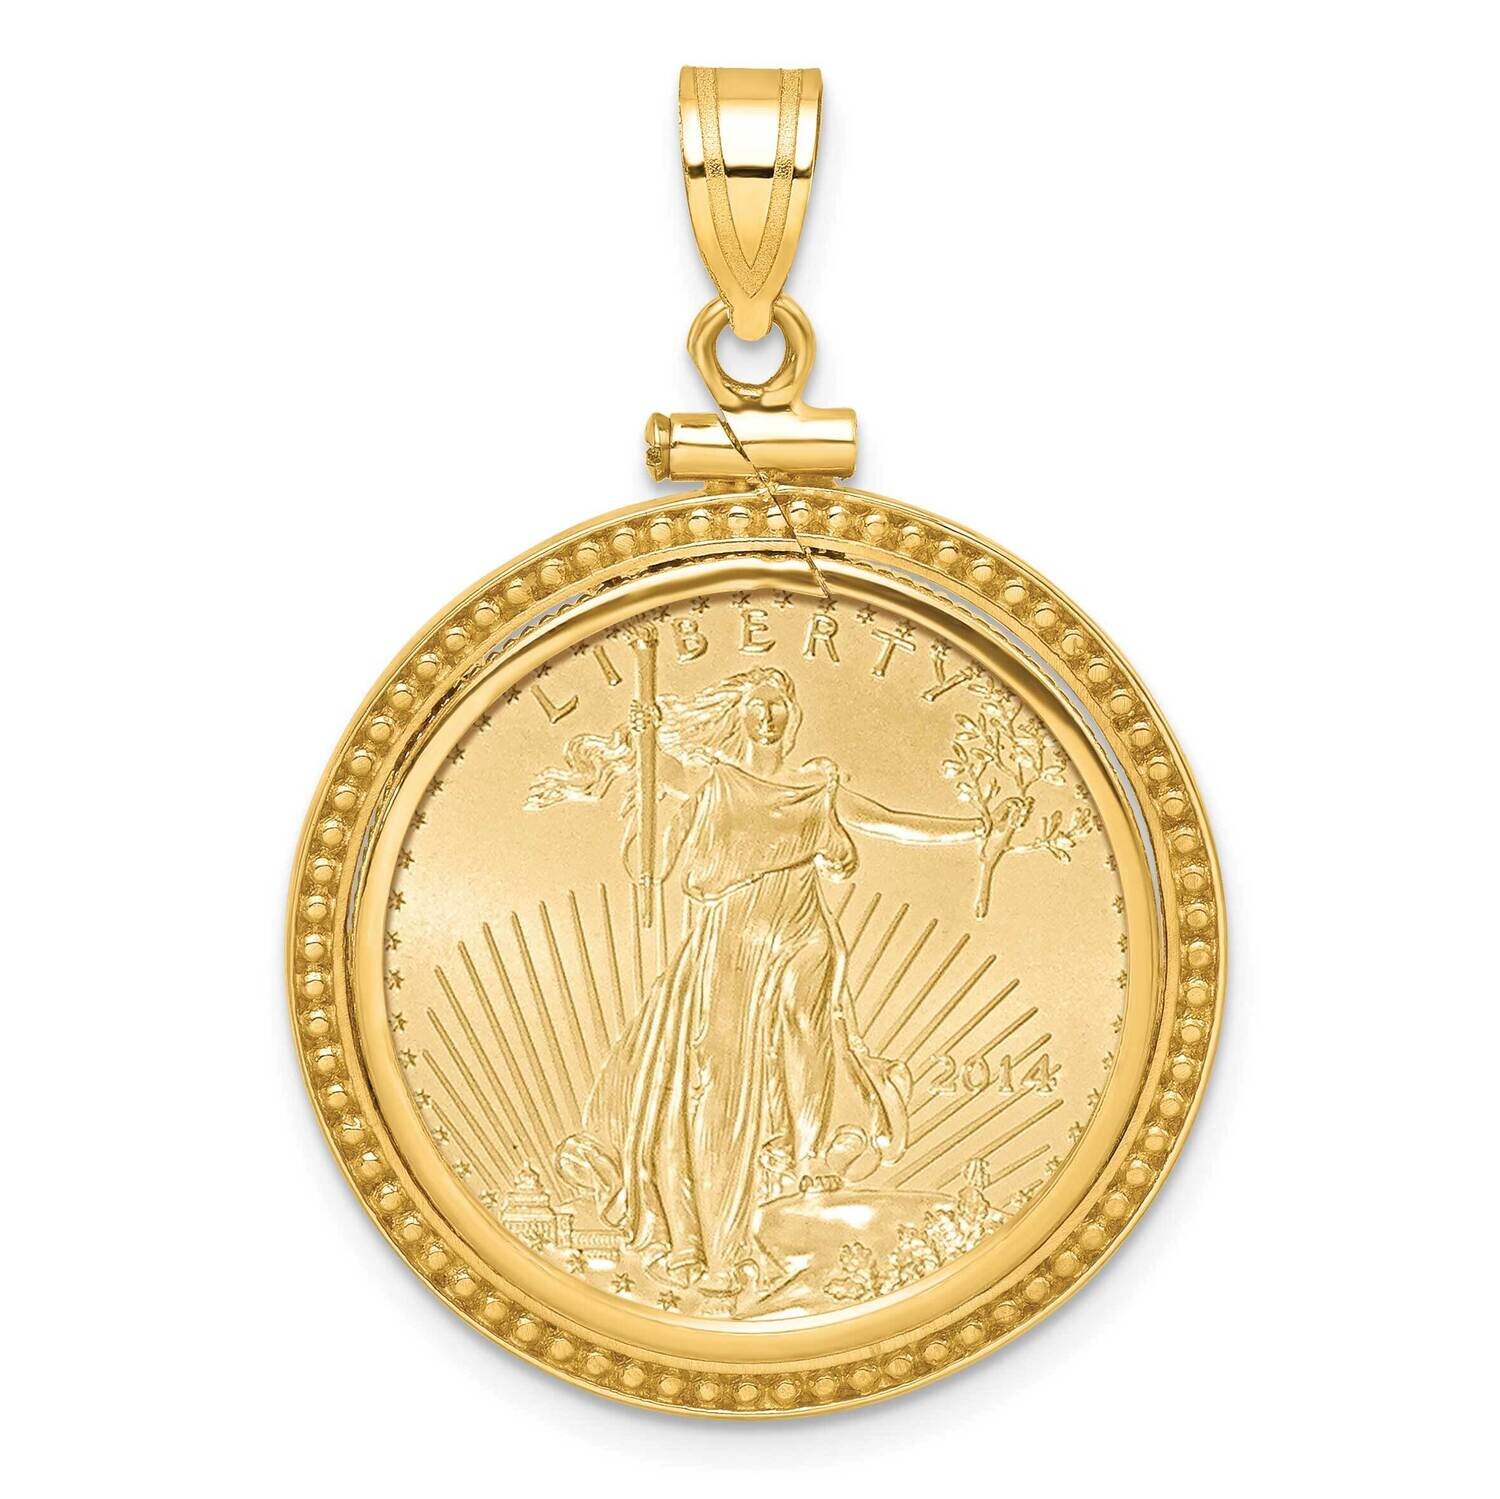 Polished Beaded Screw Top Mounted 1/4Oz American Eagle Coin Bezel Pendant 14k Gold C8184/22.0C